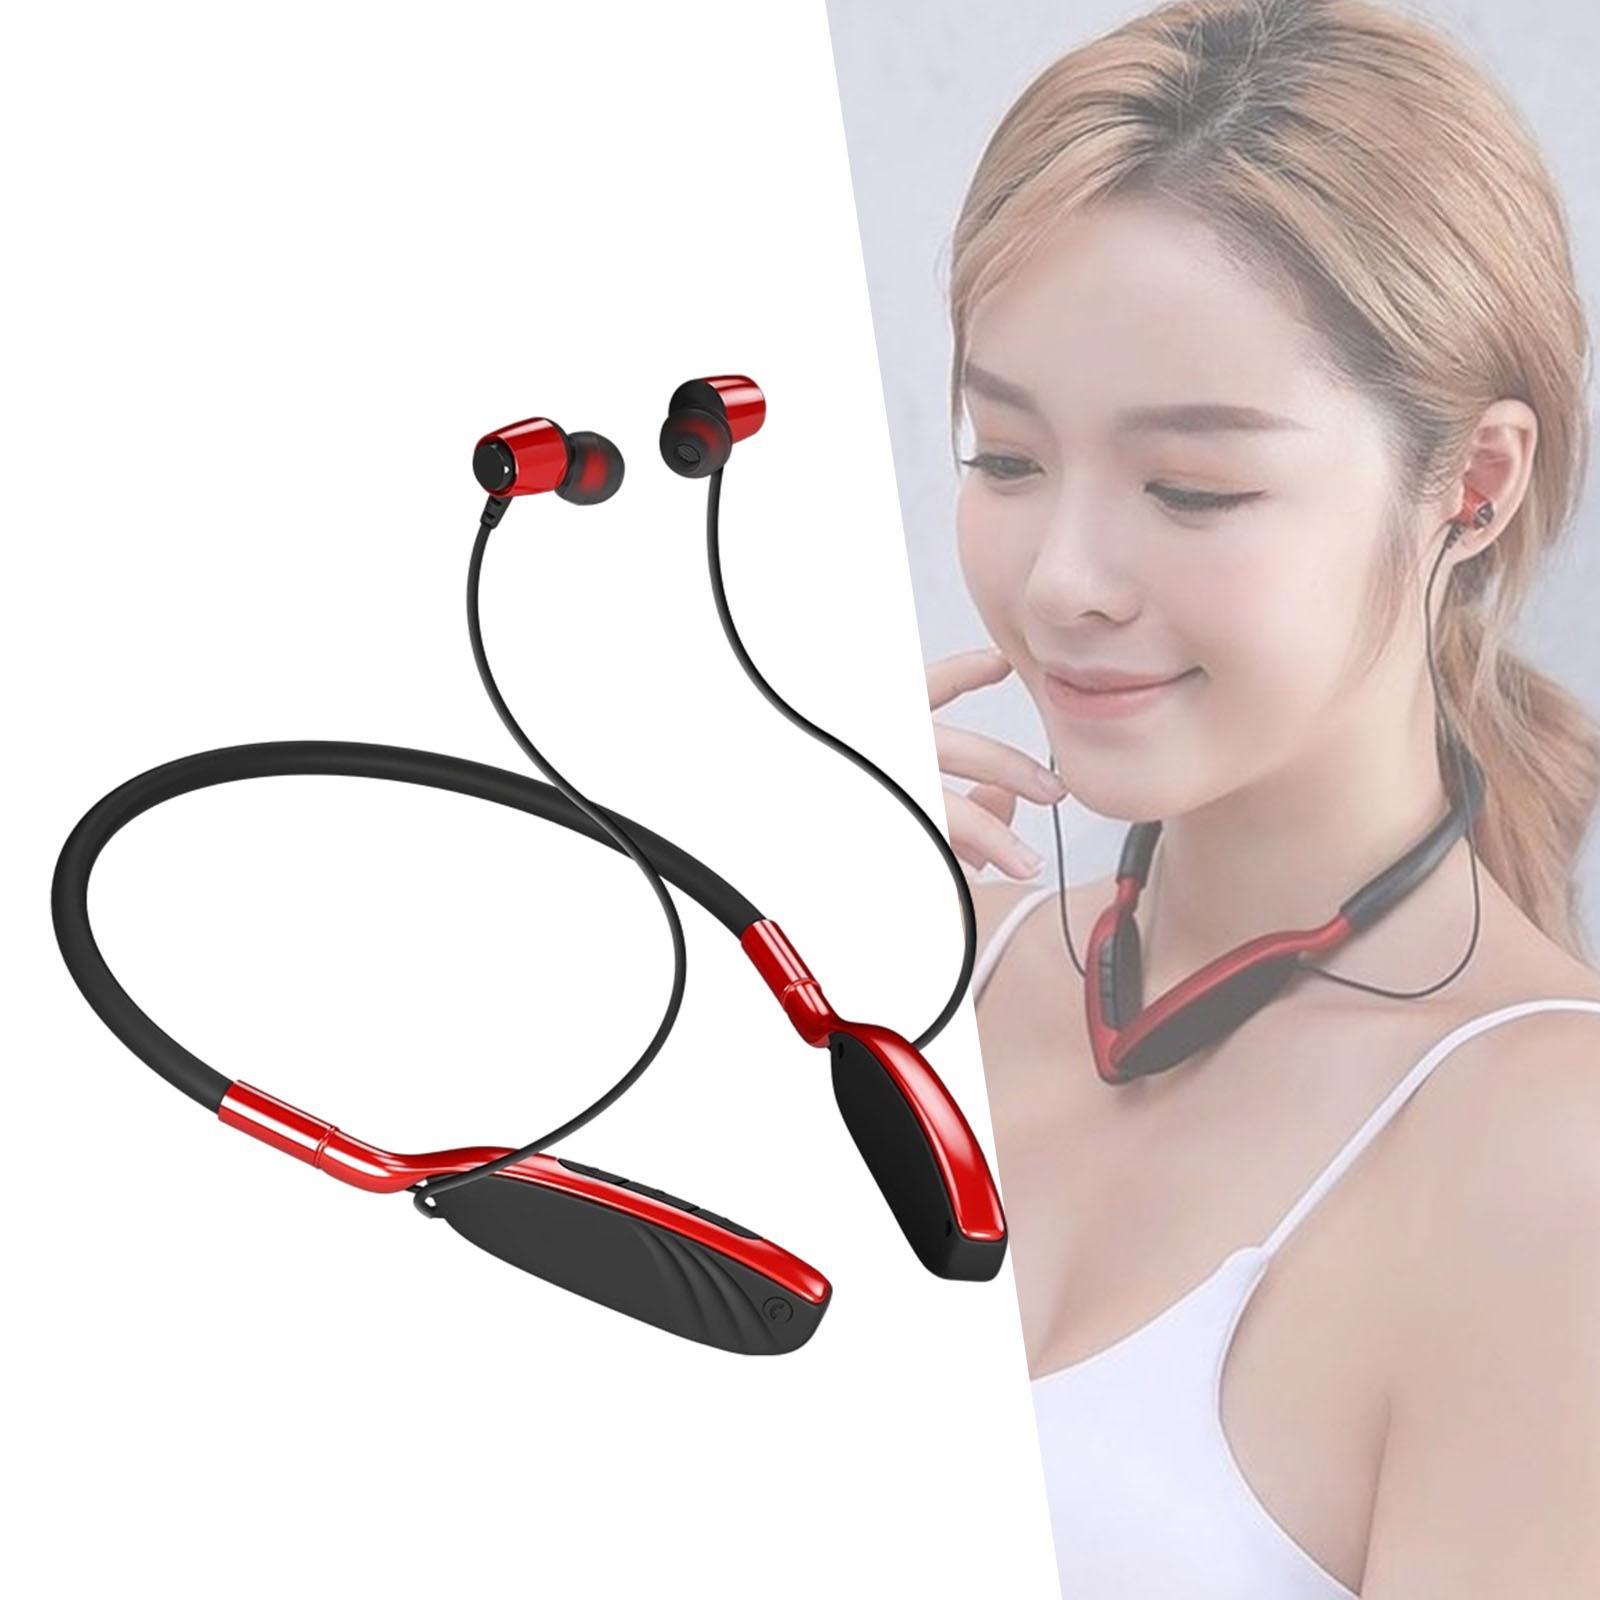 Gym Sport Earphones Wireless w/Mic Bluetooth Headphones for Home Office Red